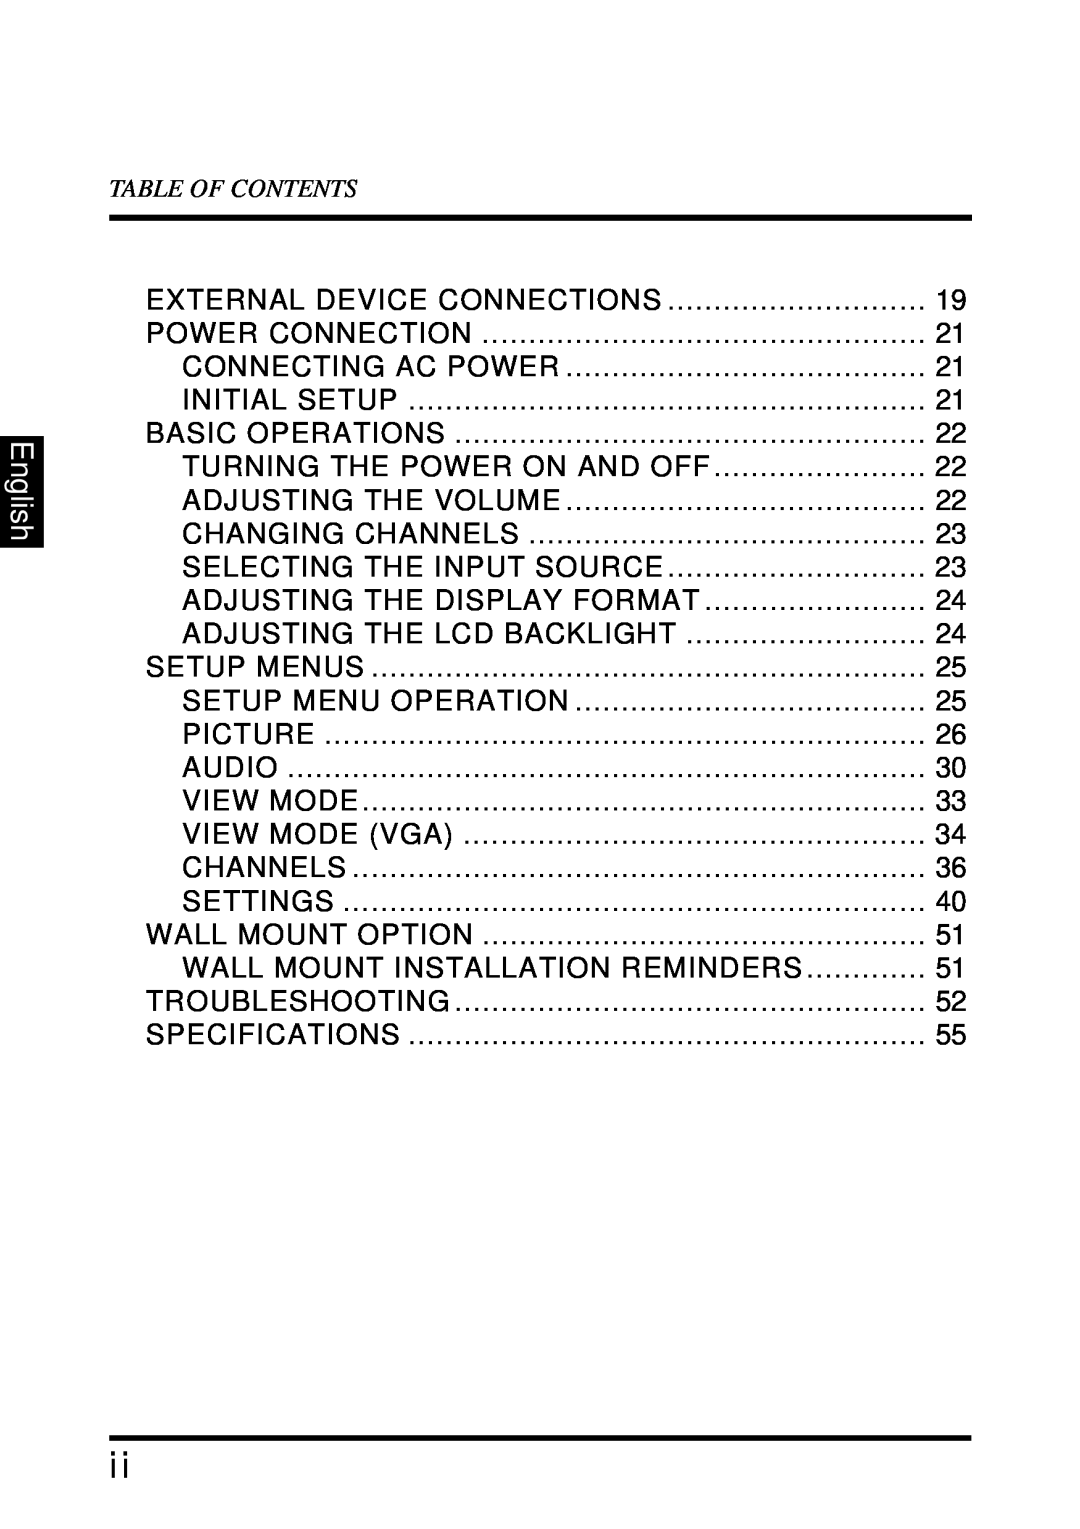 Westinghouse SK-32H640G user manual English, External Device Connections 